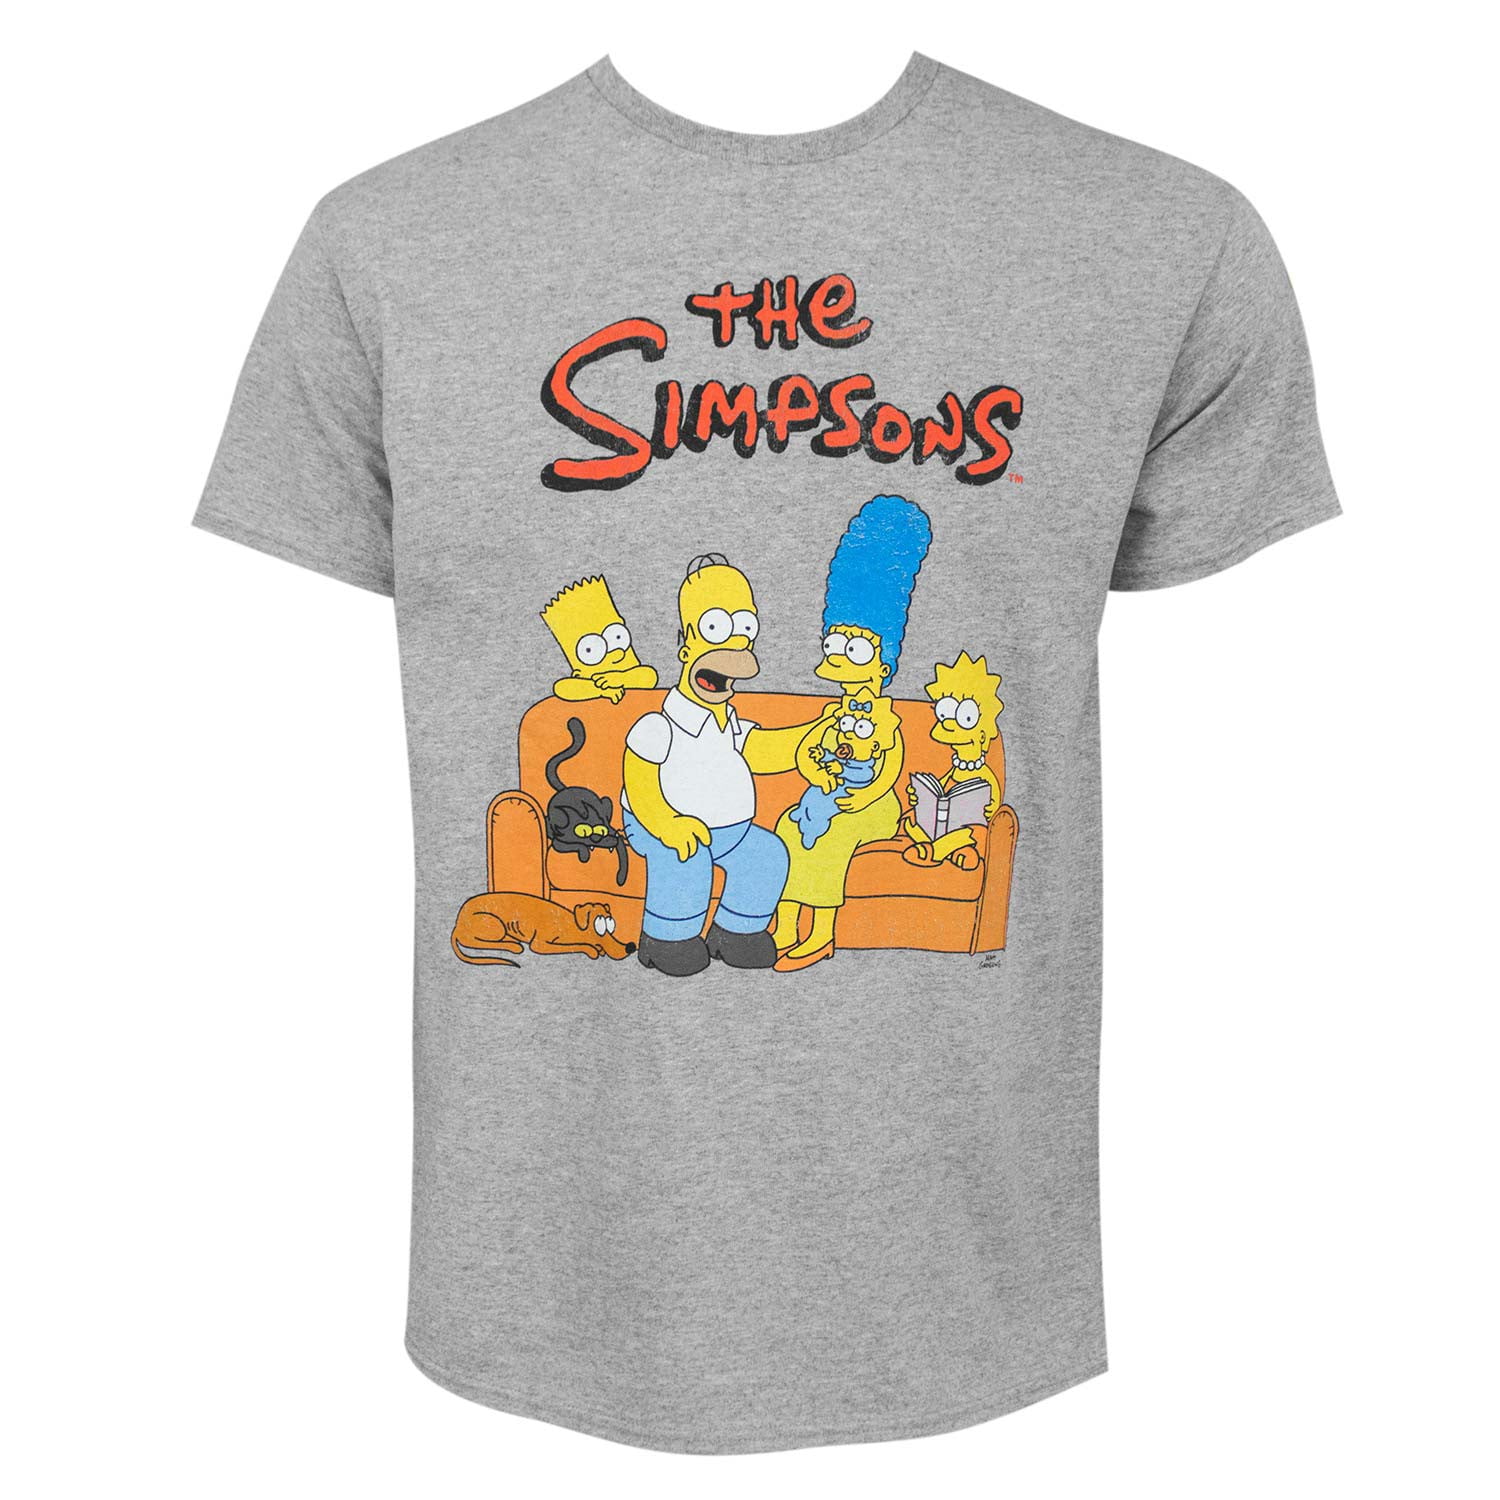 The Simpsons Men's Grey Couch Fam T-Shirt-X-Large